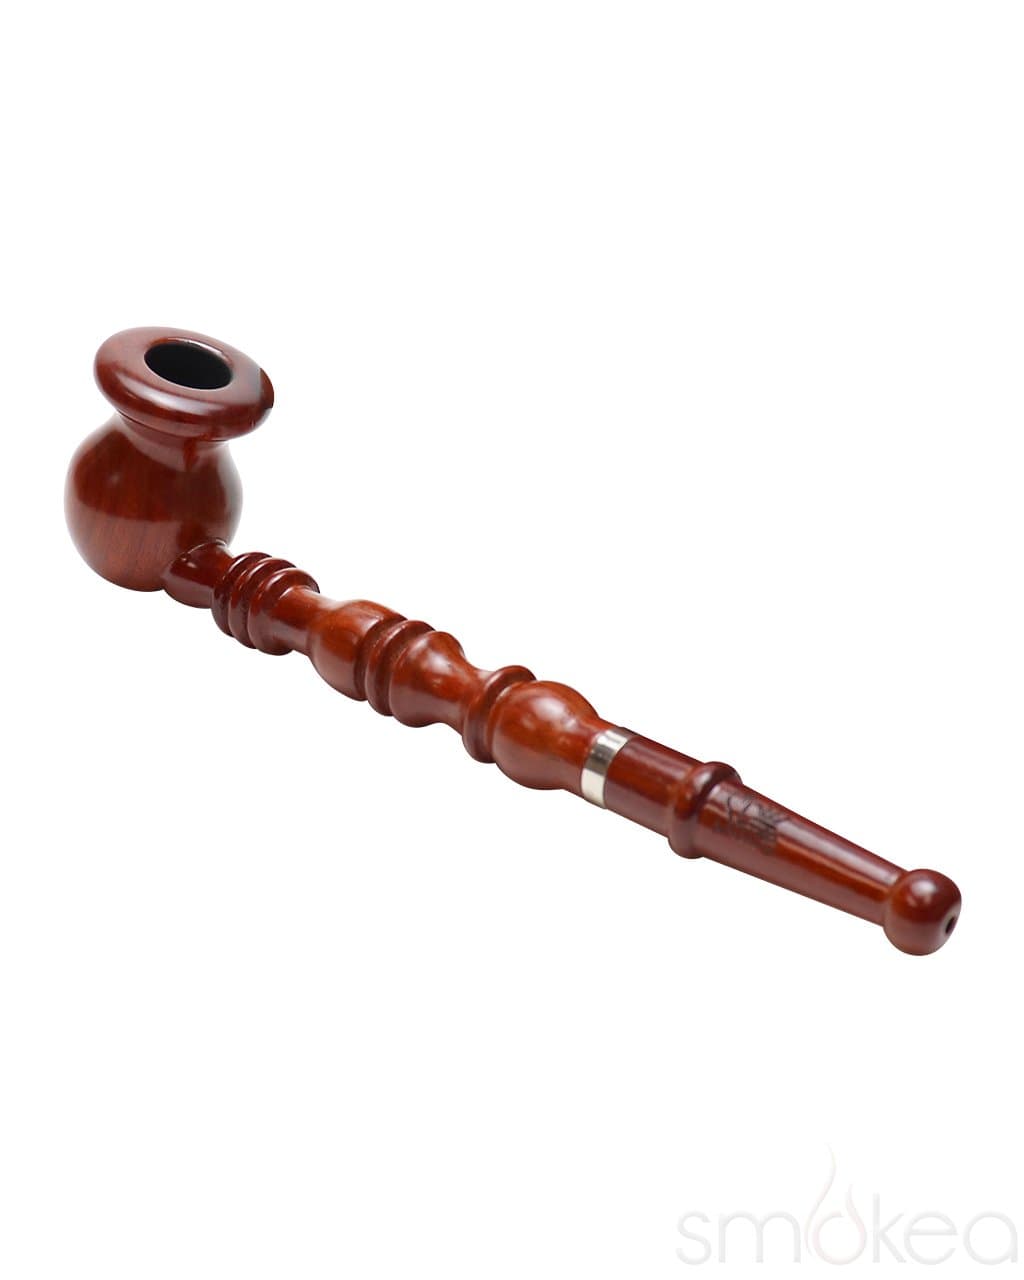 Shire Pipes Vase Bowl Churchwarden Cherry Wood Pipe